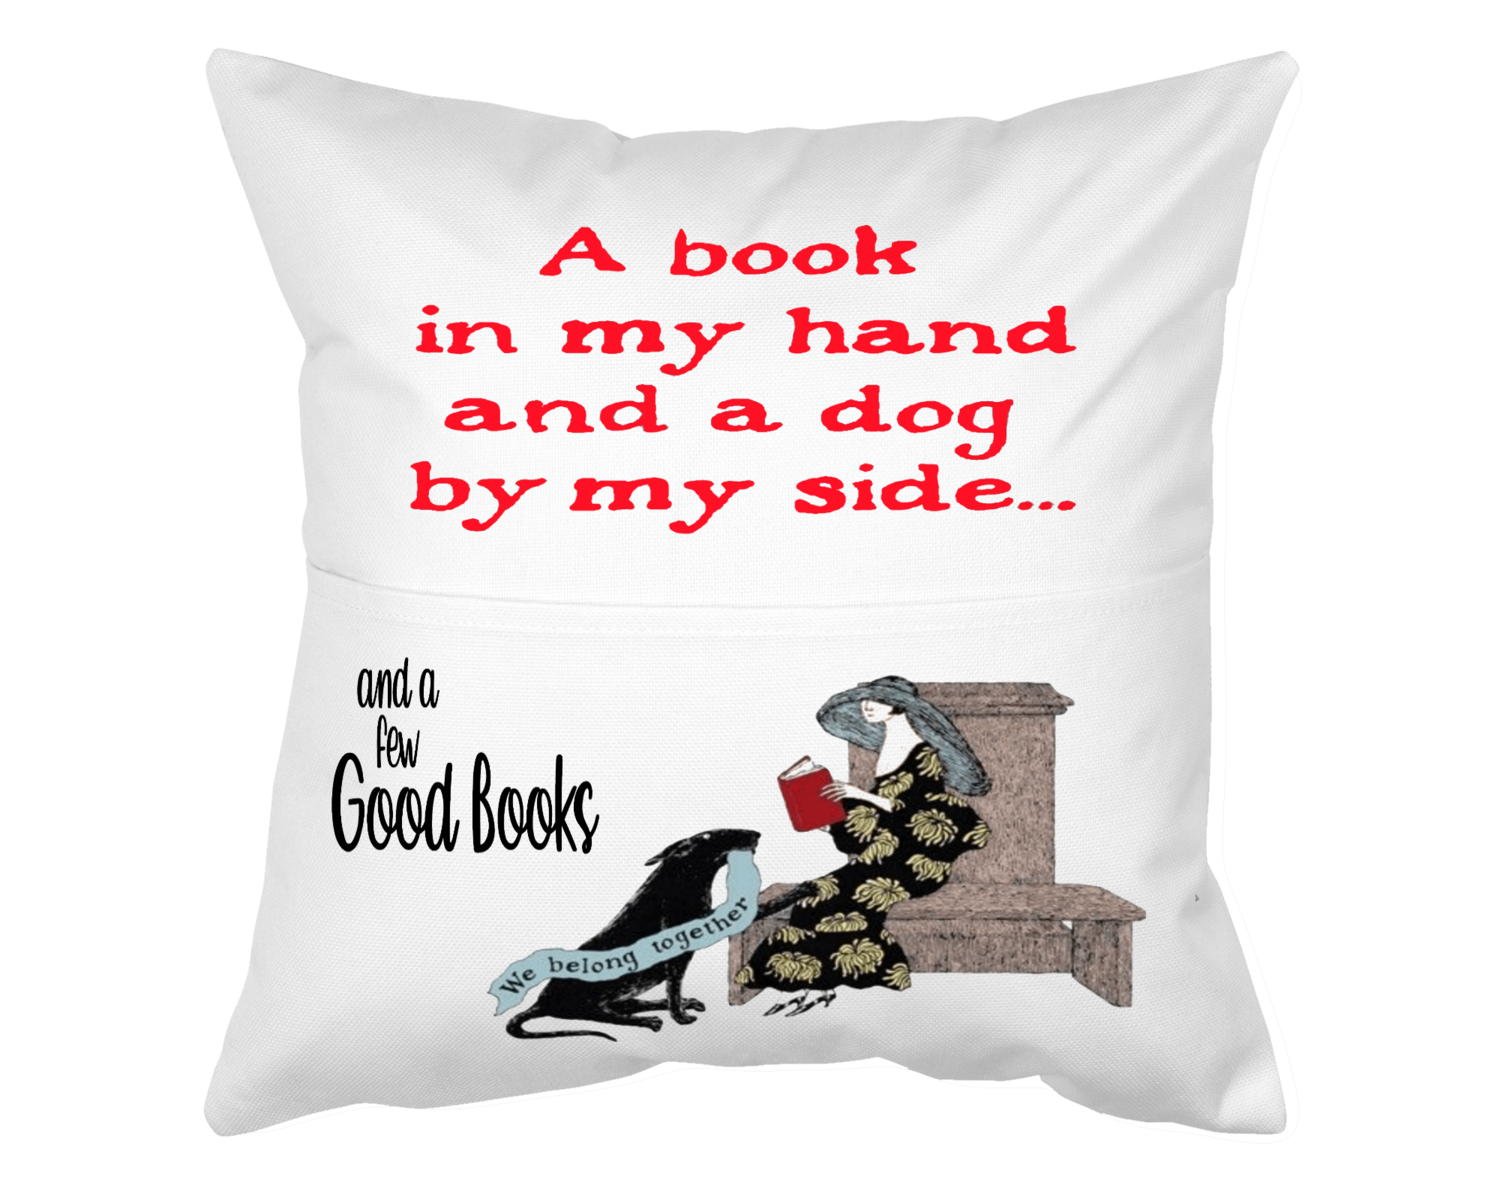 Dog Pillow With Pocket: A BOOK IN MY HAND AND A DOG BY MY SIDE...AND A FEW GOOD BOOKS